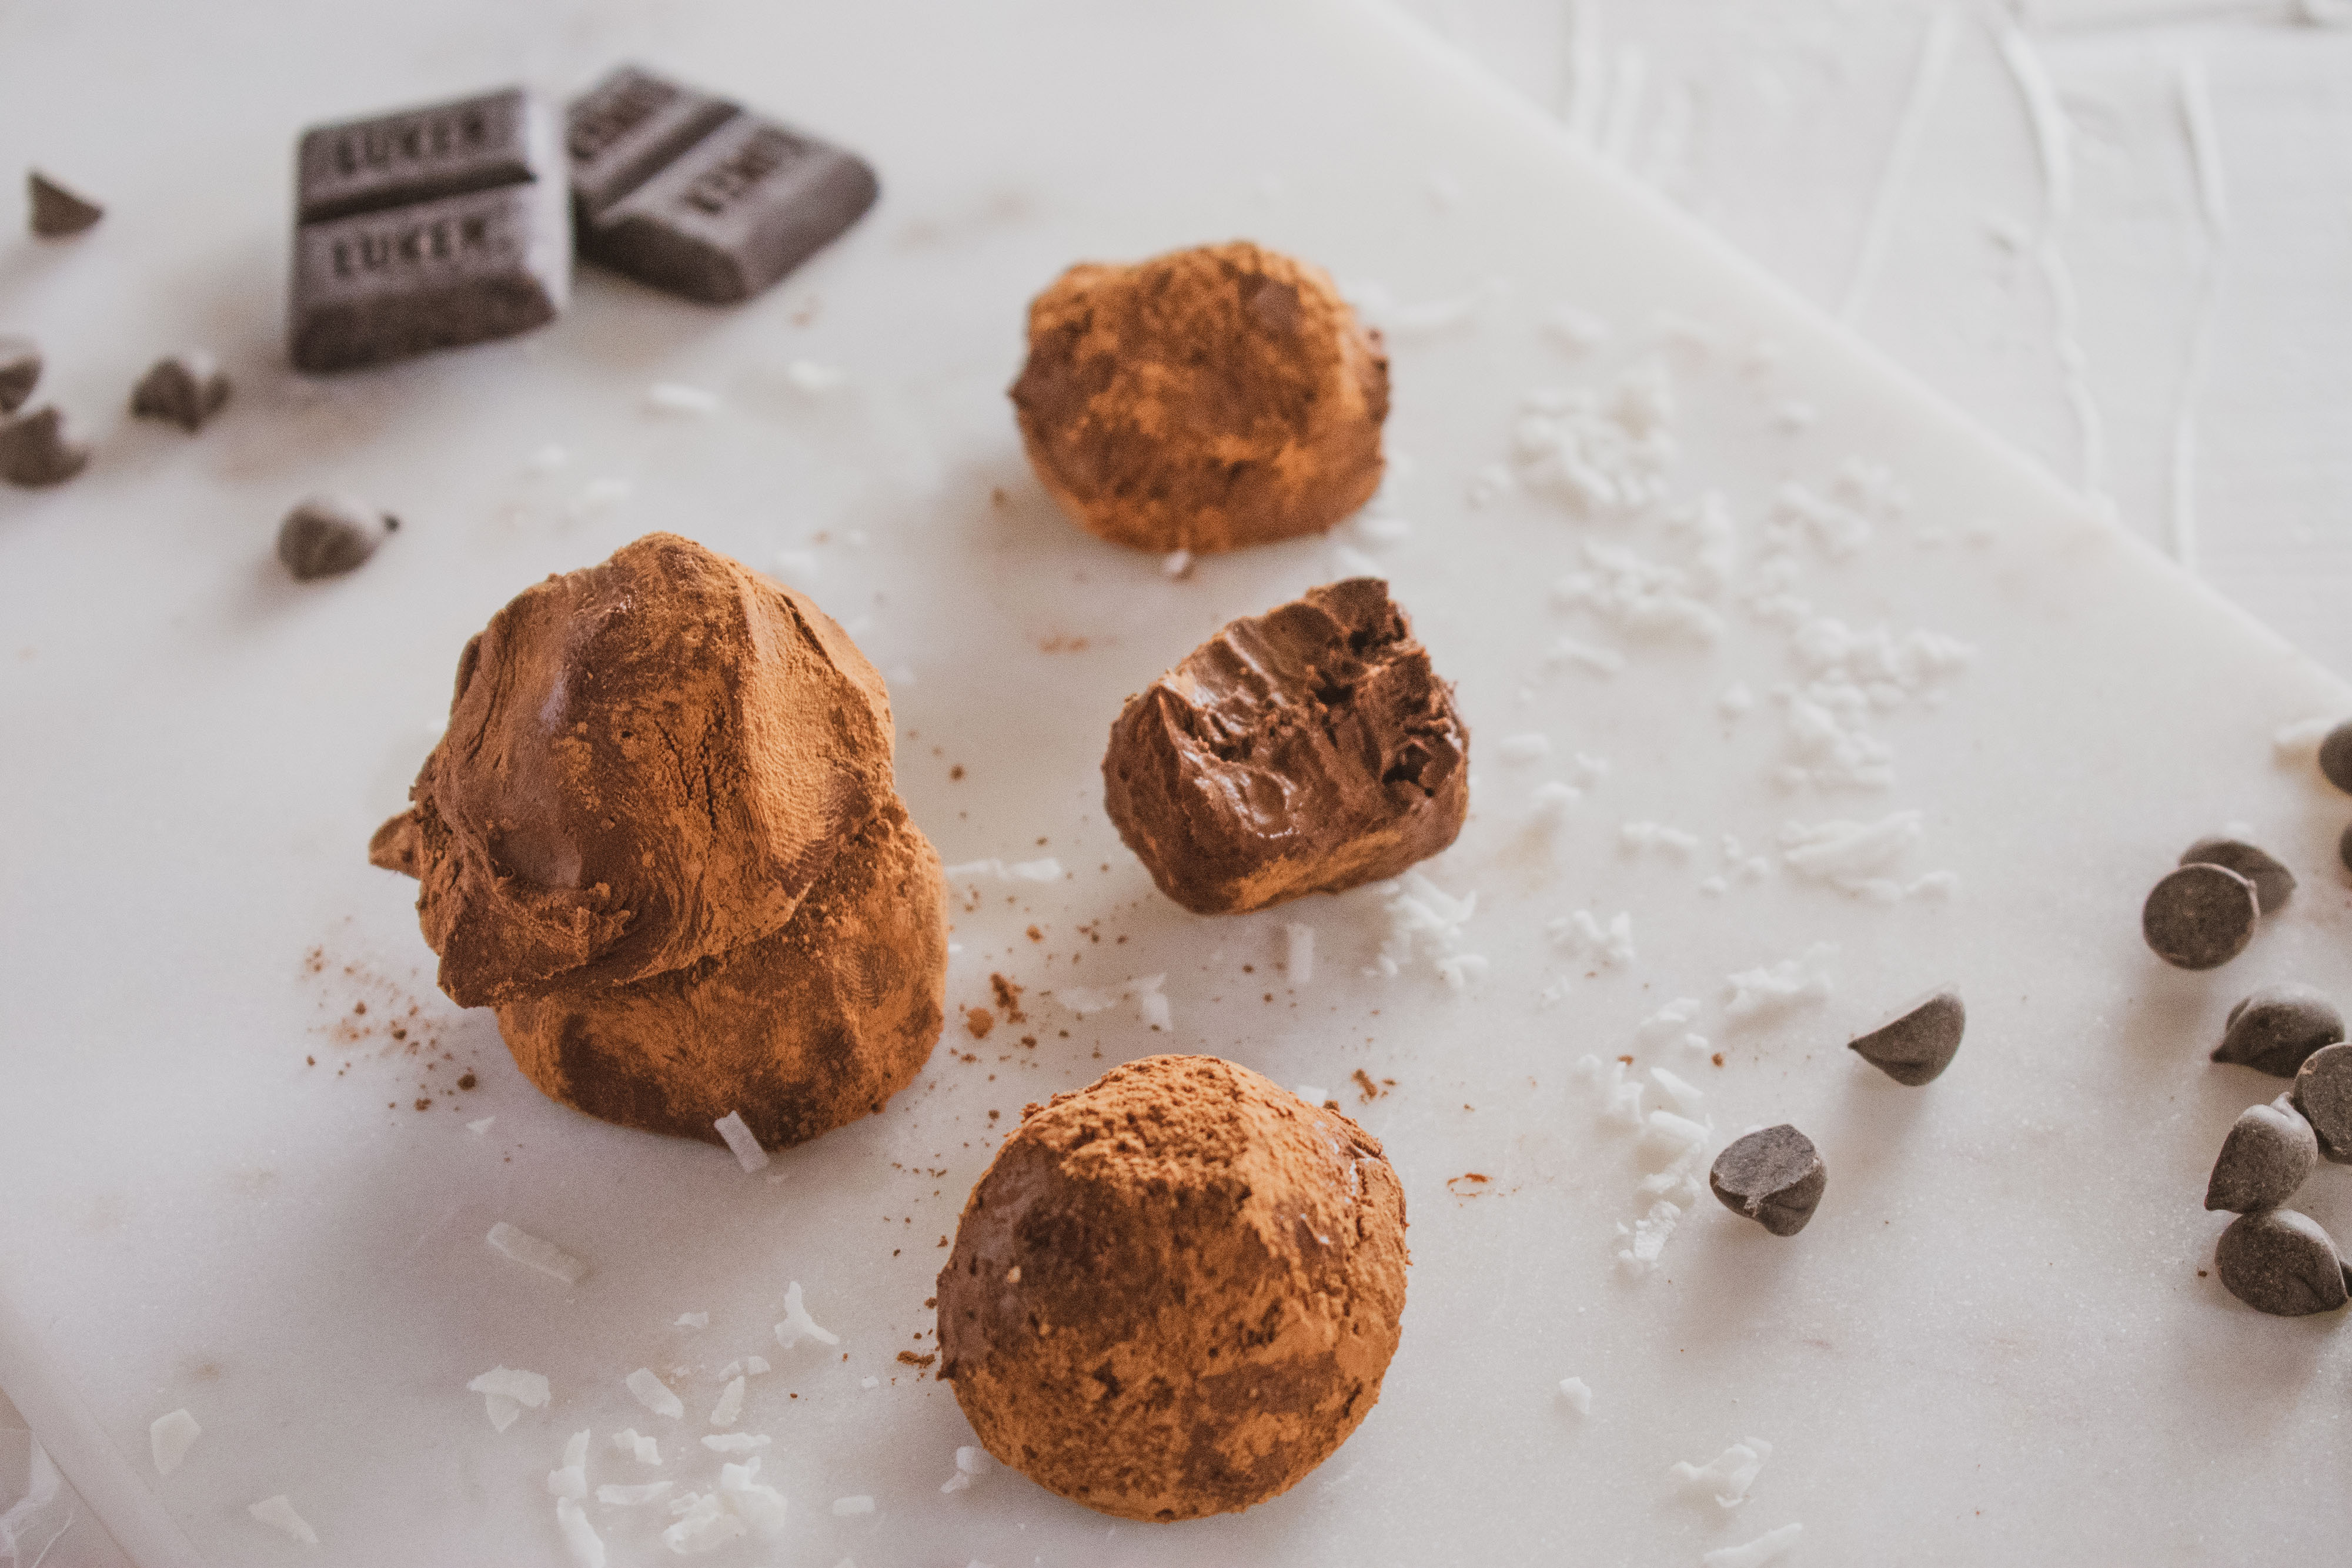 Cocoa powder covered keto chocolate truffles. Set on a white surface with chocolate chips and with a bite taken out.